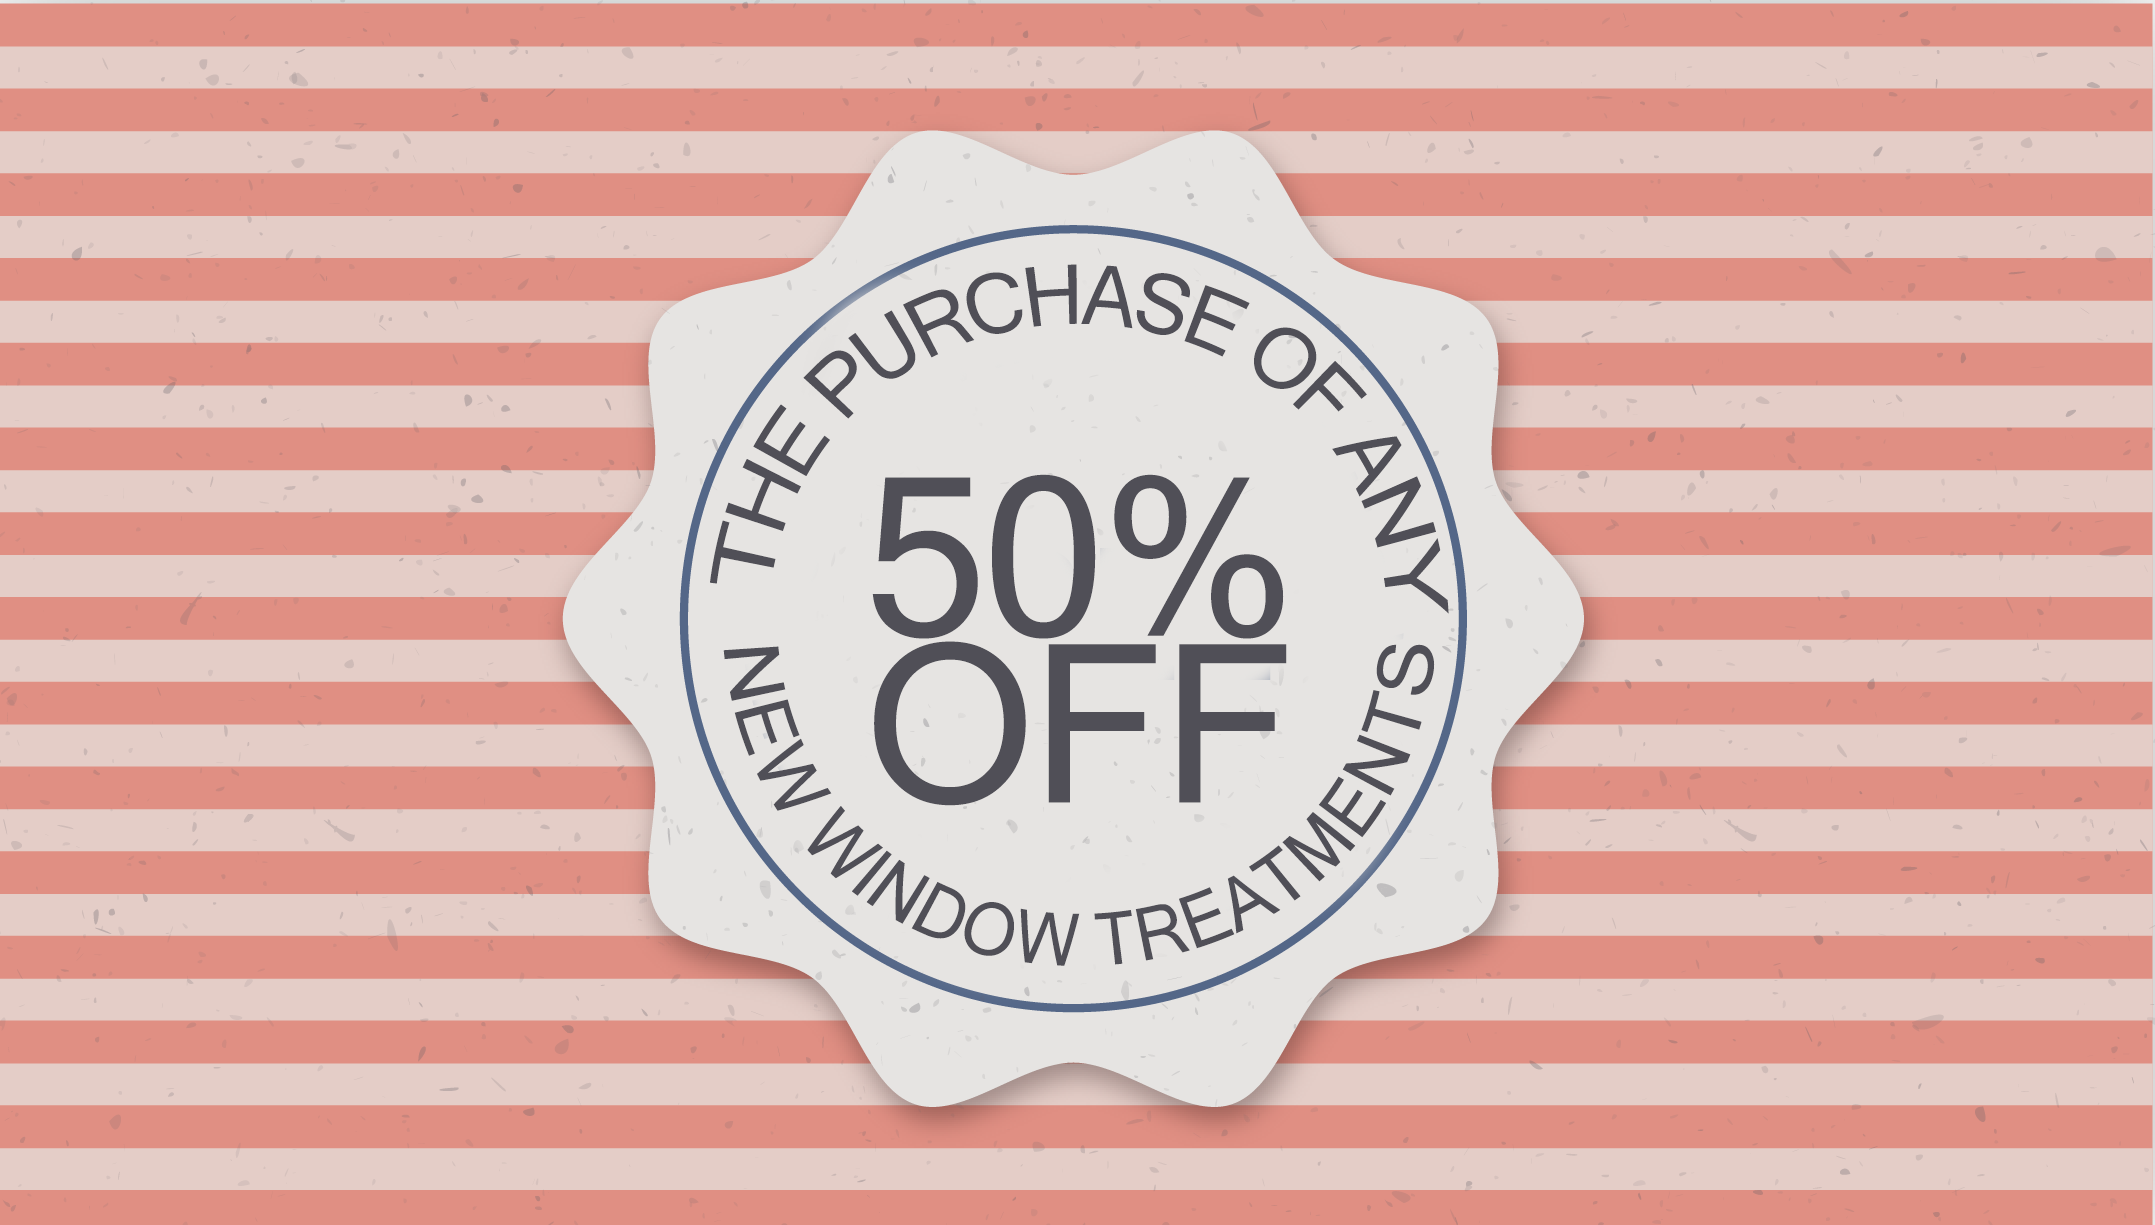 50 OFF THE PURCHASE OF ANY NEW WINDOW TREATMENTS